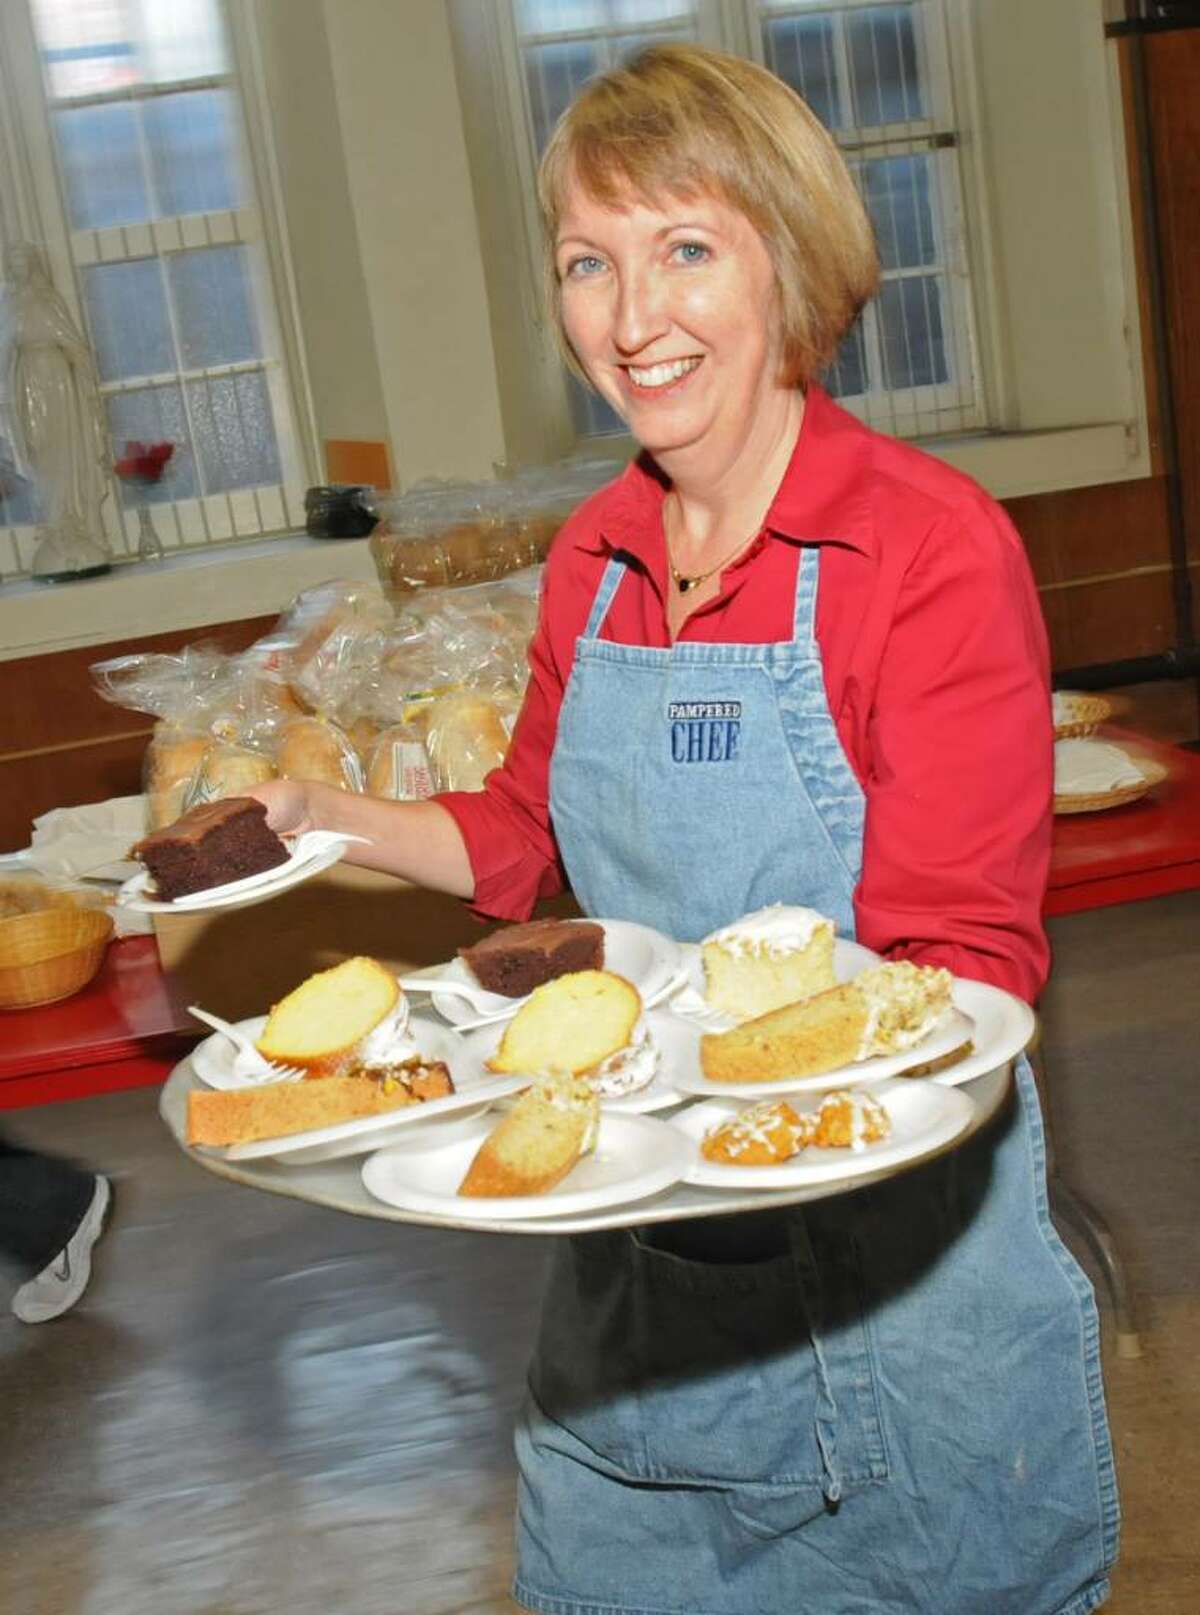 Kathleen Jimino, county executive of Rensselaer County, serves dessert at a pre-election day spaghetti dinner at St. Mary's church hall in Troy, NY on November 2, 2009. (Lori Van Buren / Times Union)